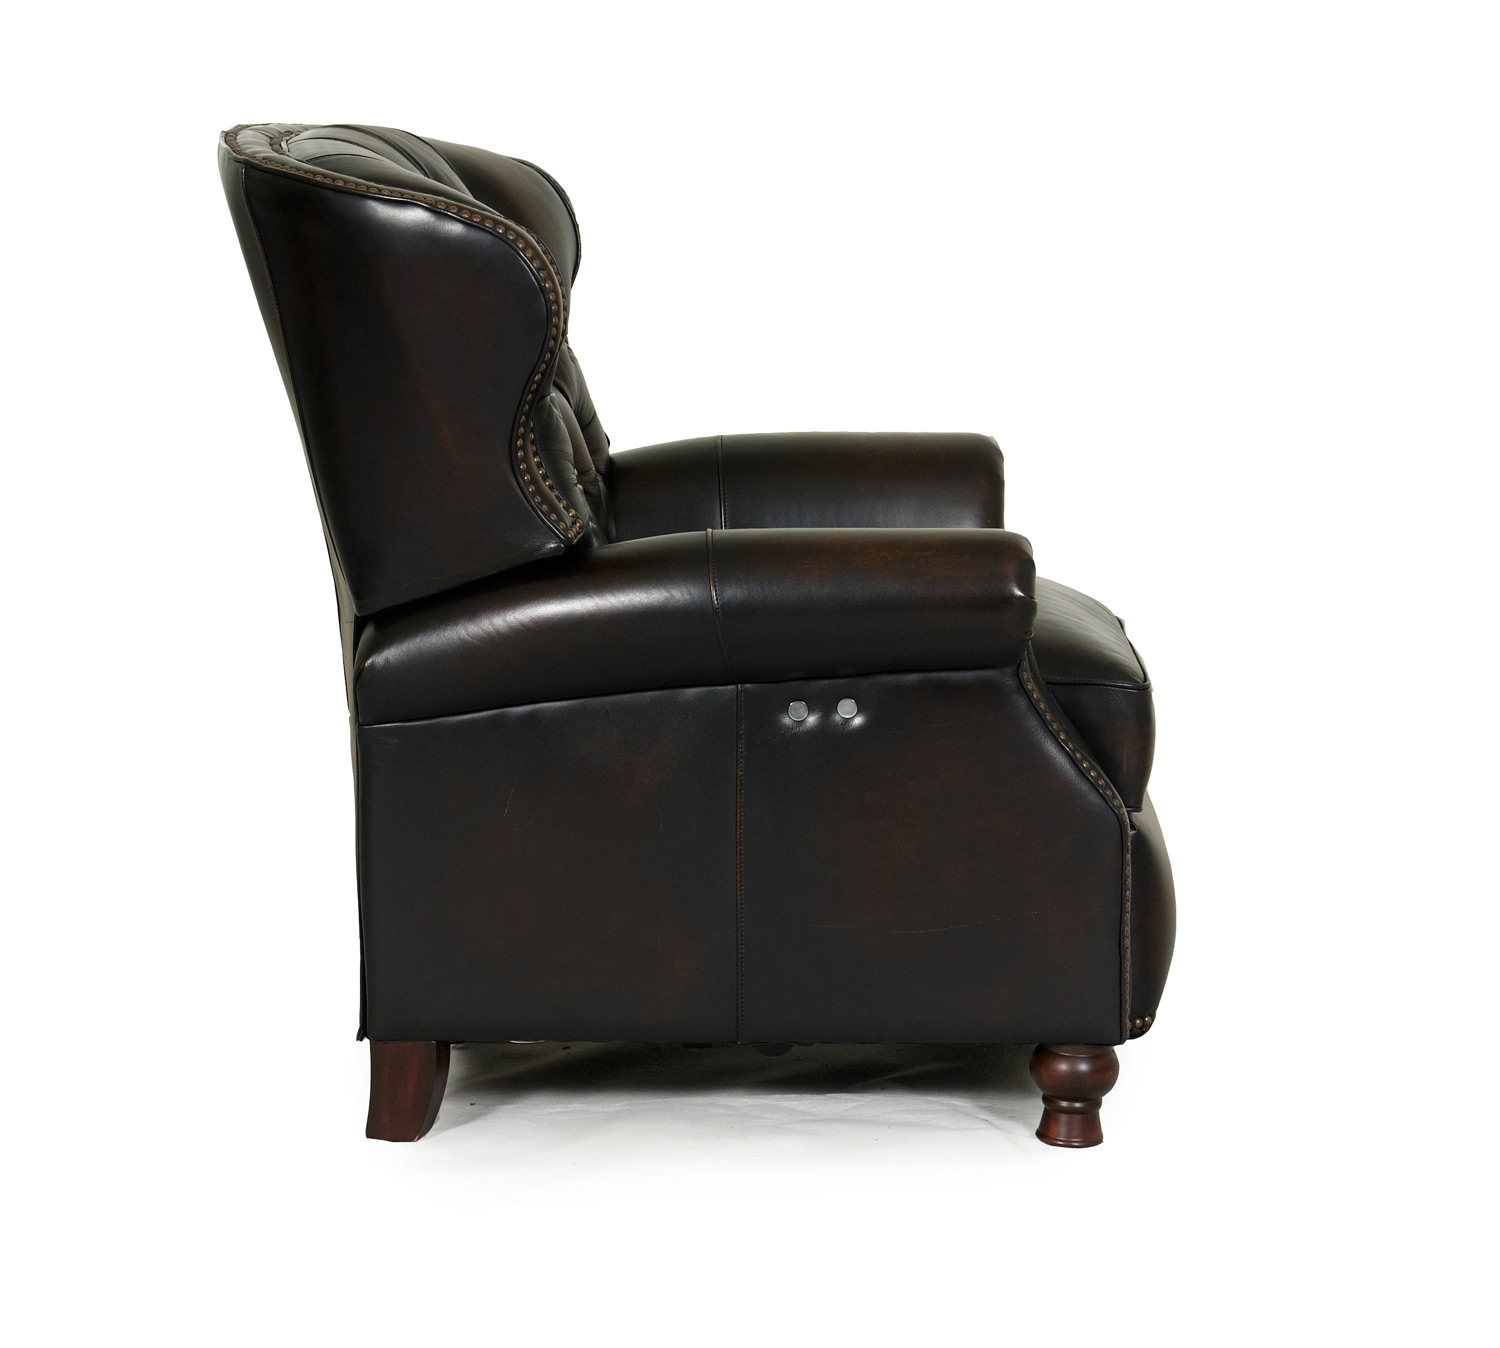 Barcalounger Presidential II Vintage Reserve Power Recliner Chair - Stetson Coffee